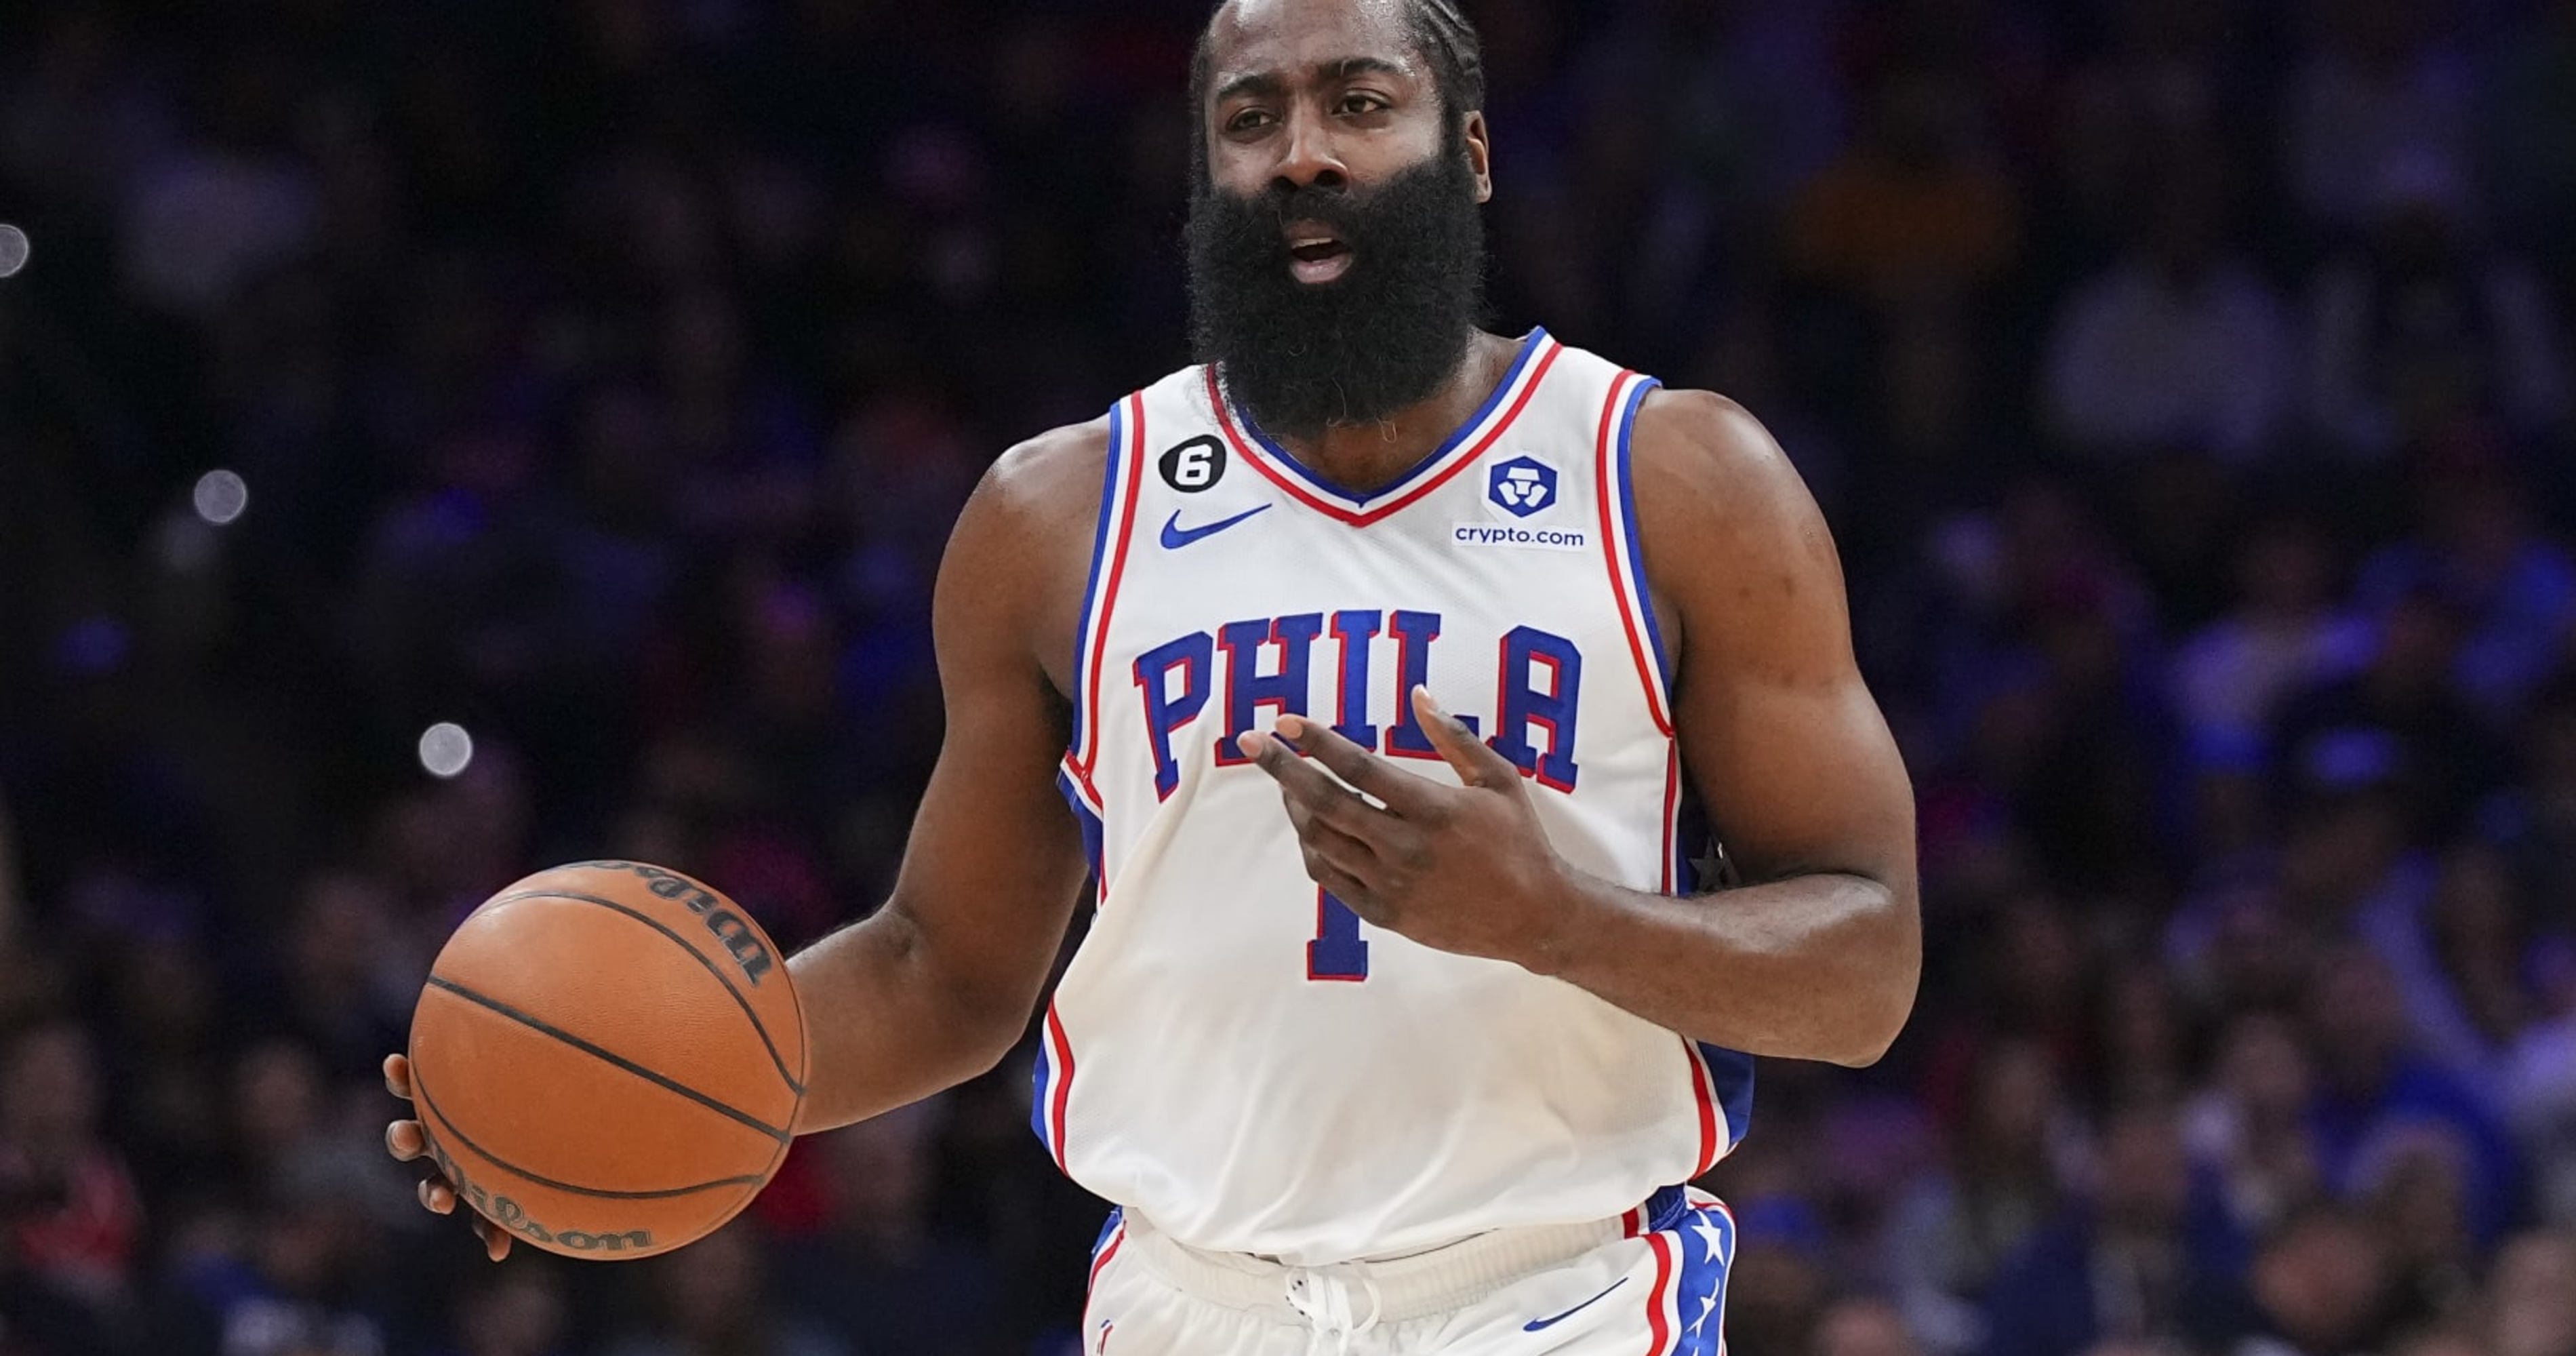 NBA Celebrity Game 2023 roster breakdown: The best and worst from